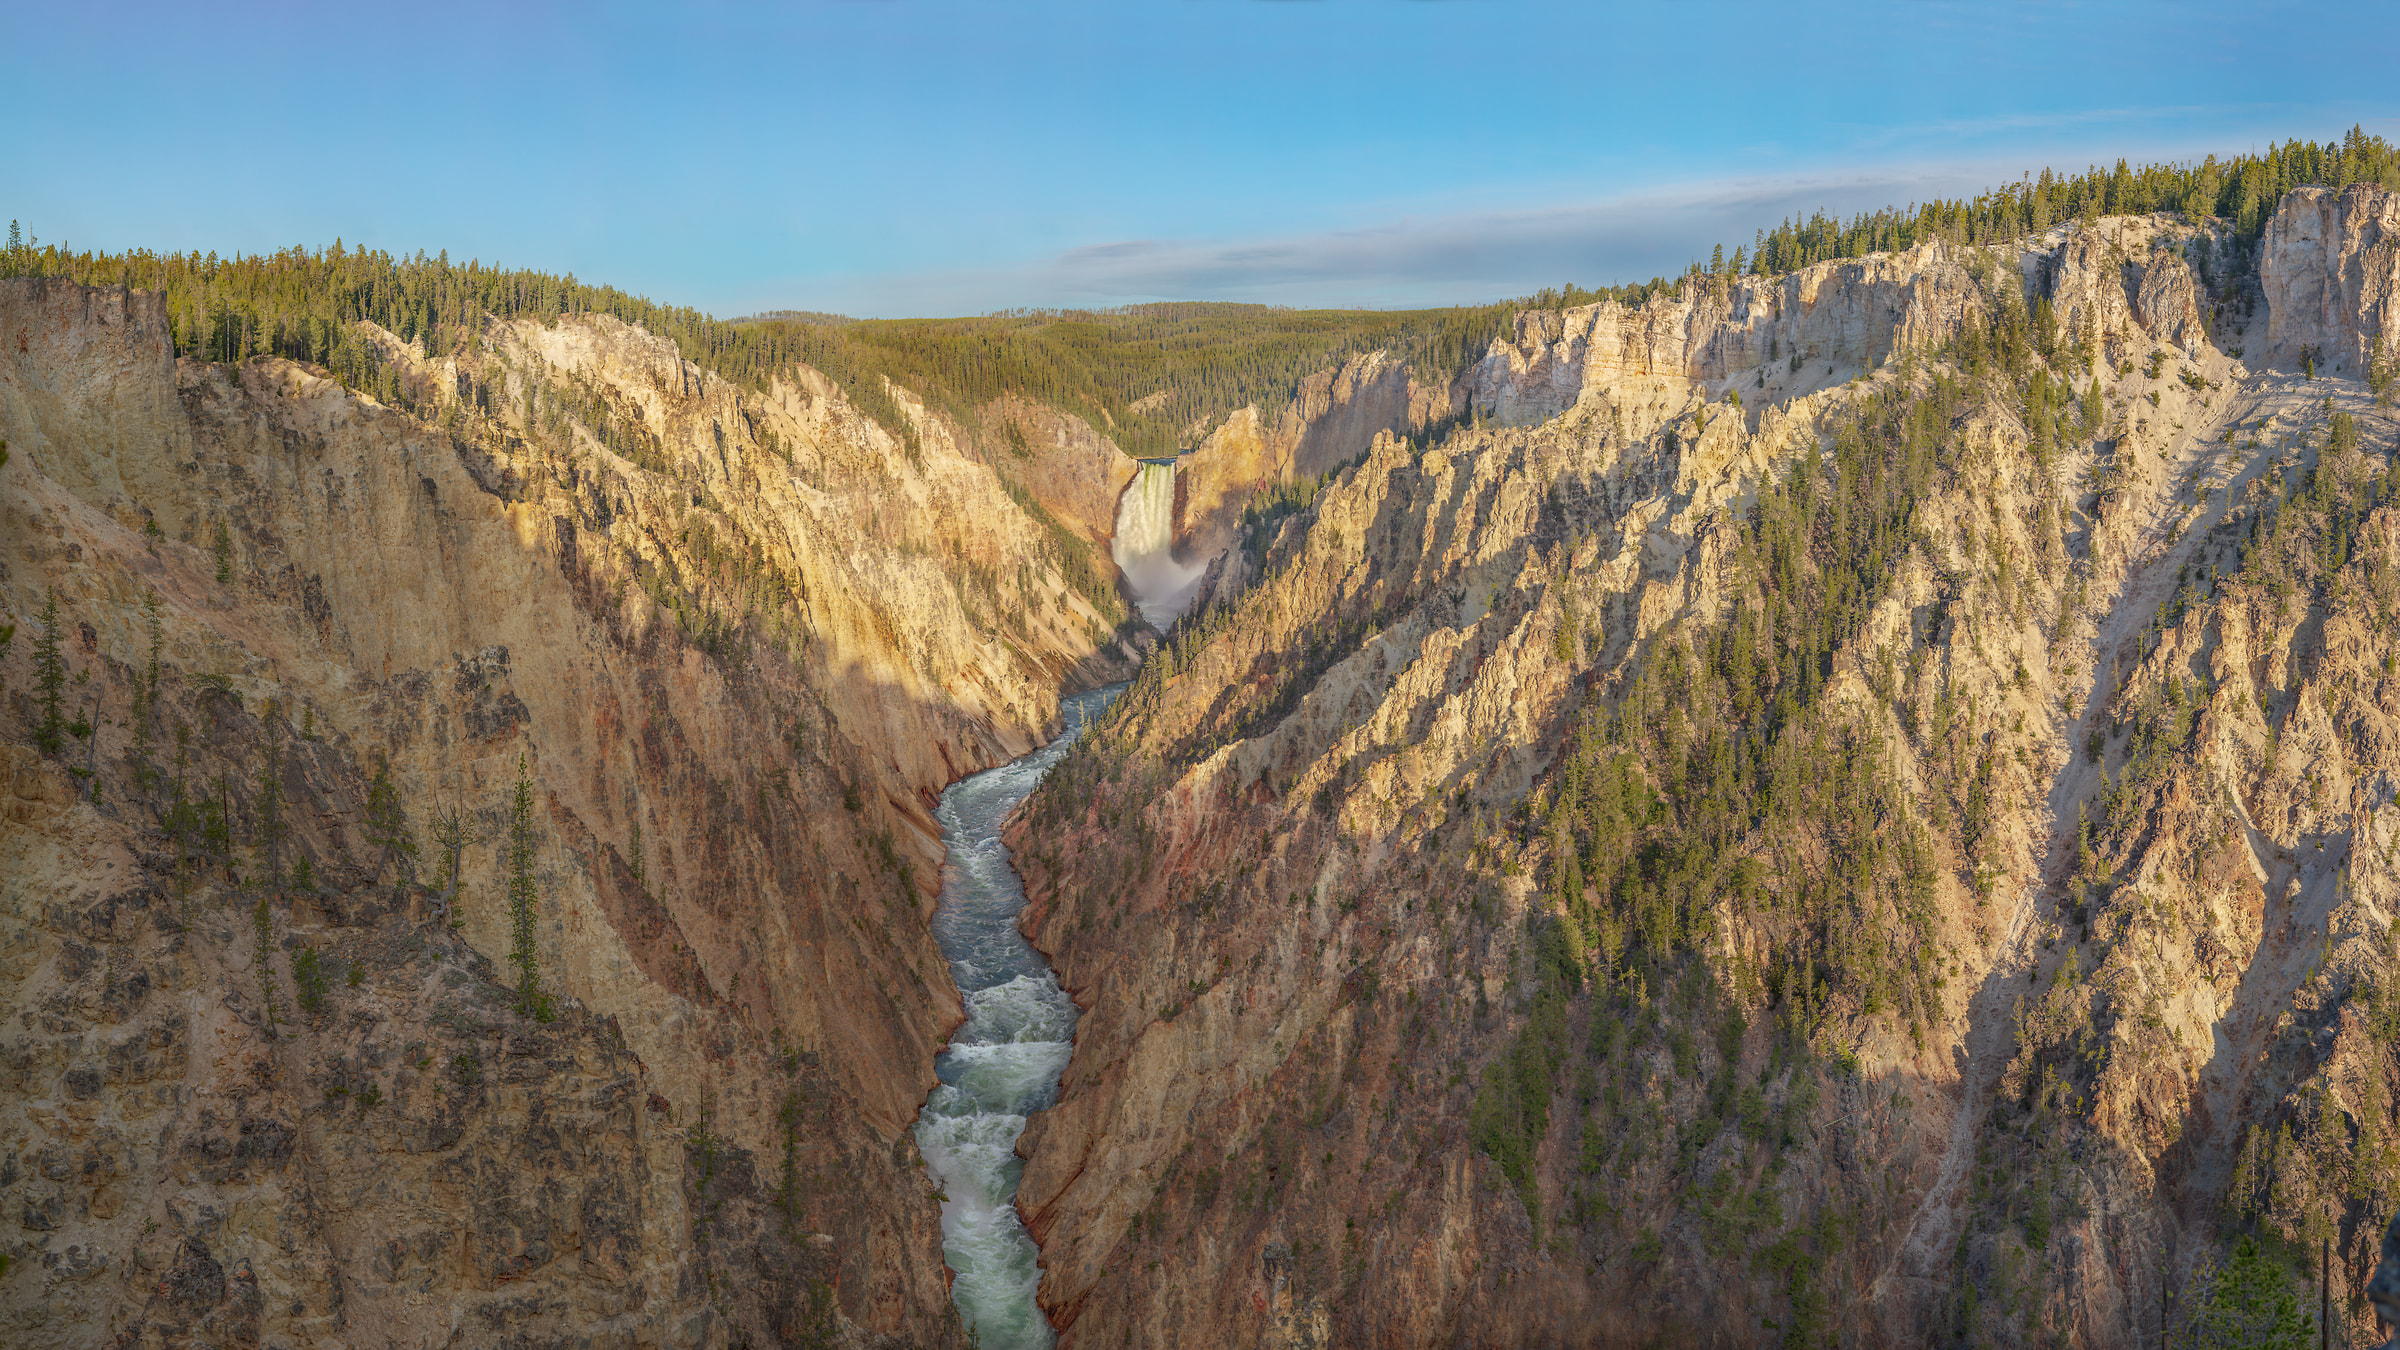 5,109 megapixels! A very high resolution, large-format VAST photo print of Yellowstone Falls; landscape photograph created by John Freeman in Artist Point overlooking the Lower Falls from south side of Yellowstone River, Yellowstone National Park, Wyoming.